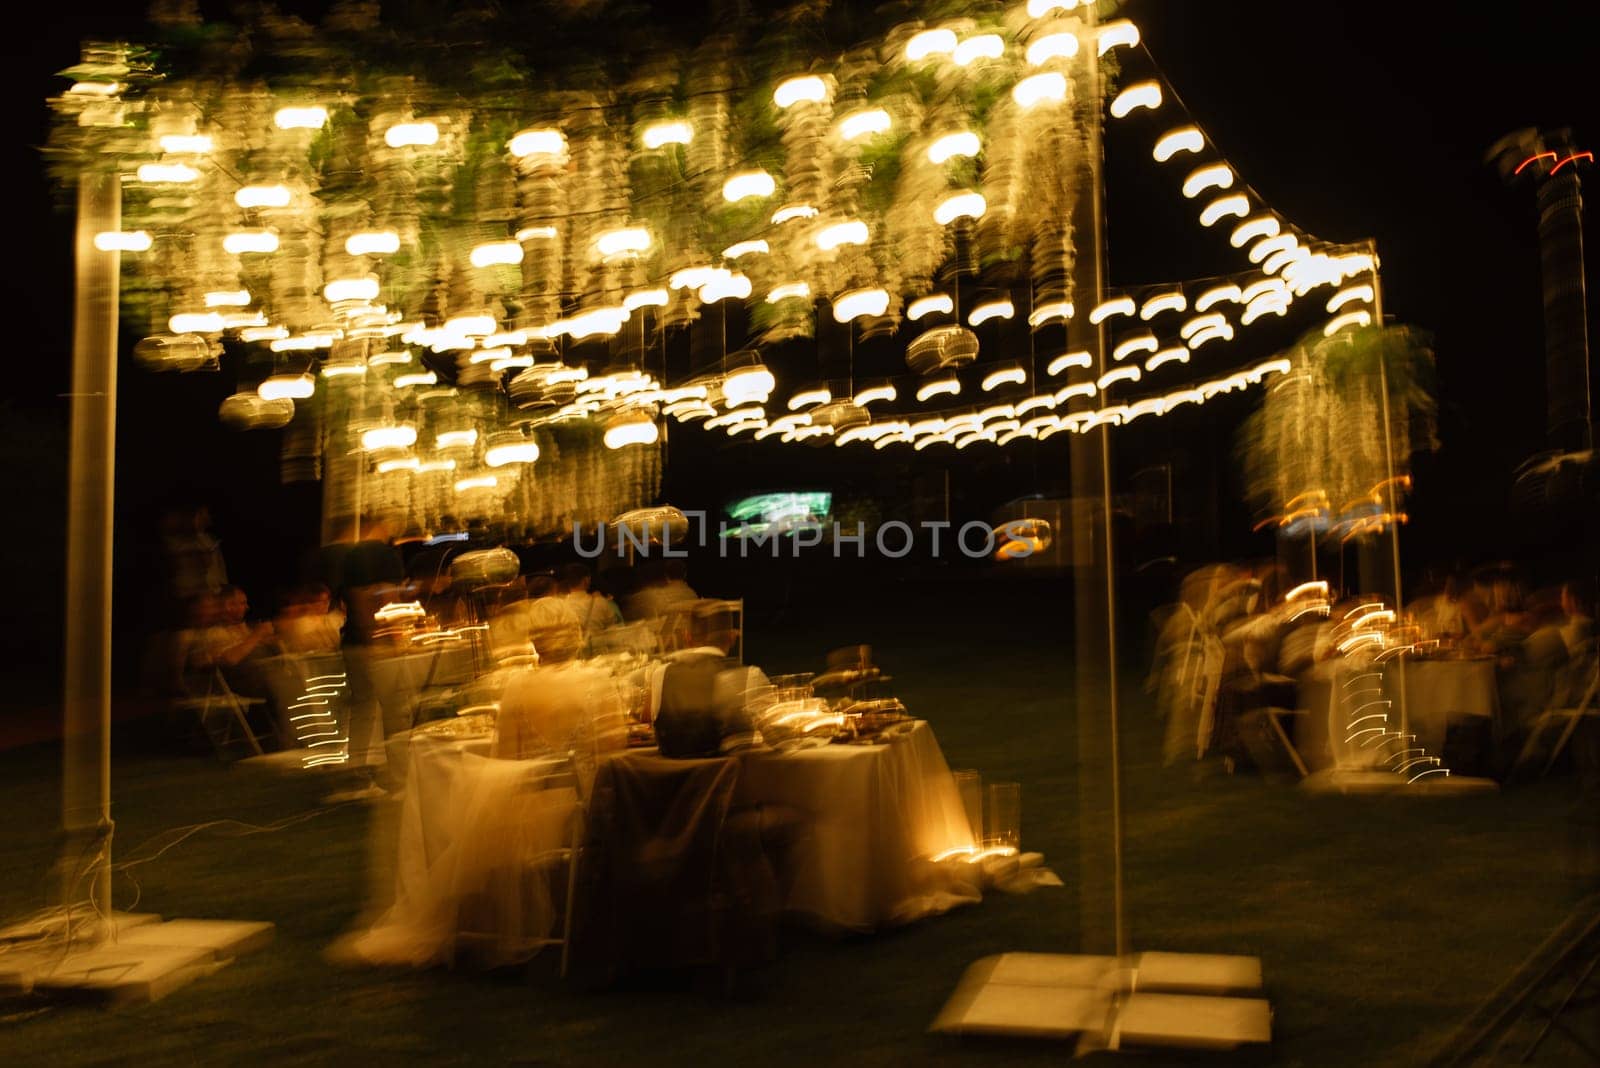 evening wedding family dinner in the forest with light bulbs and candles